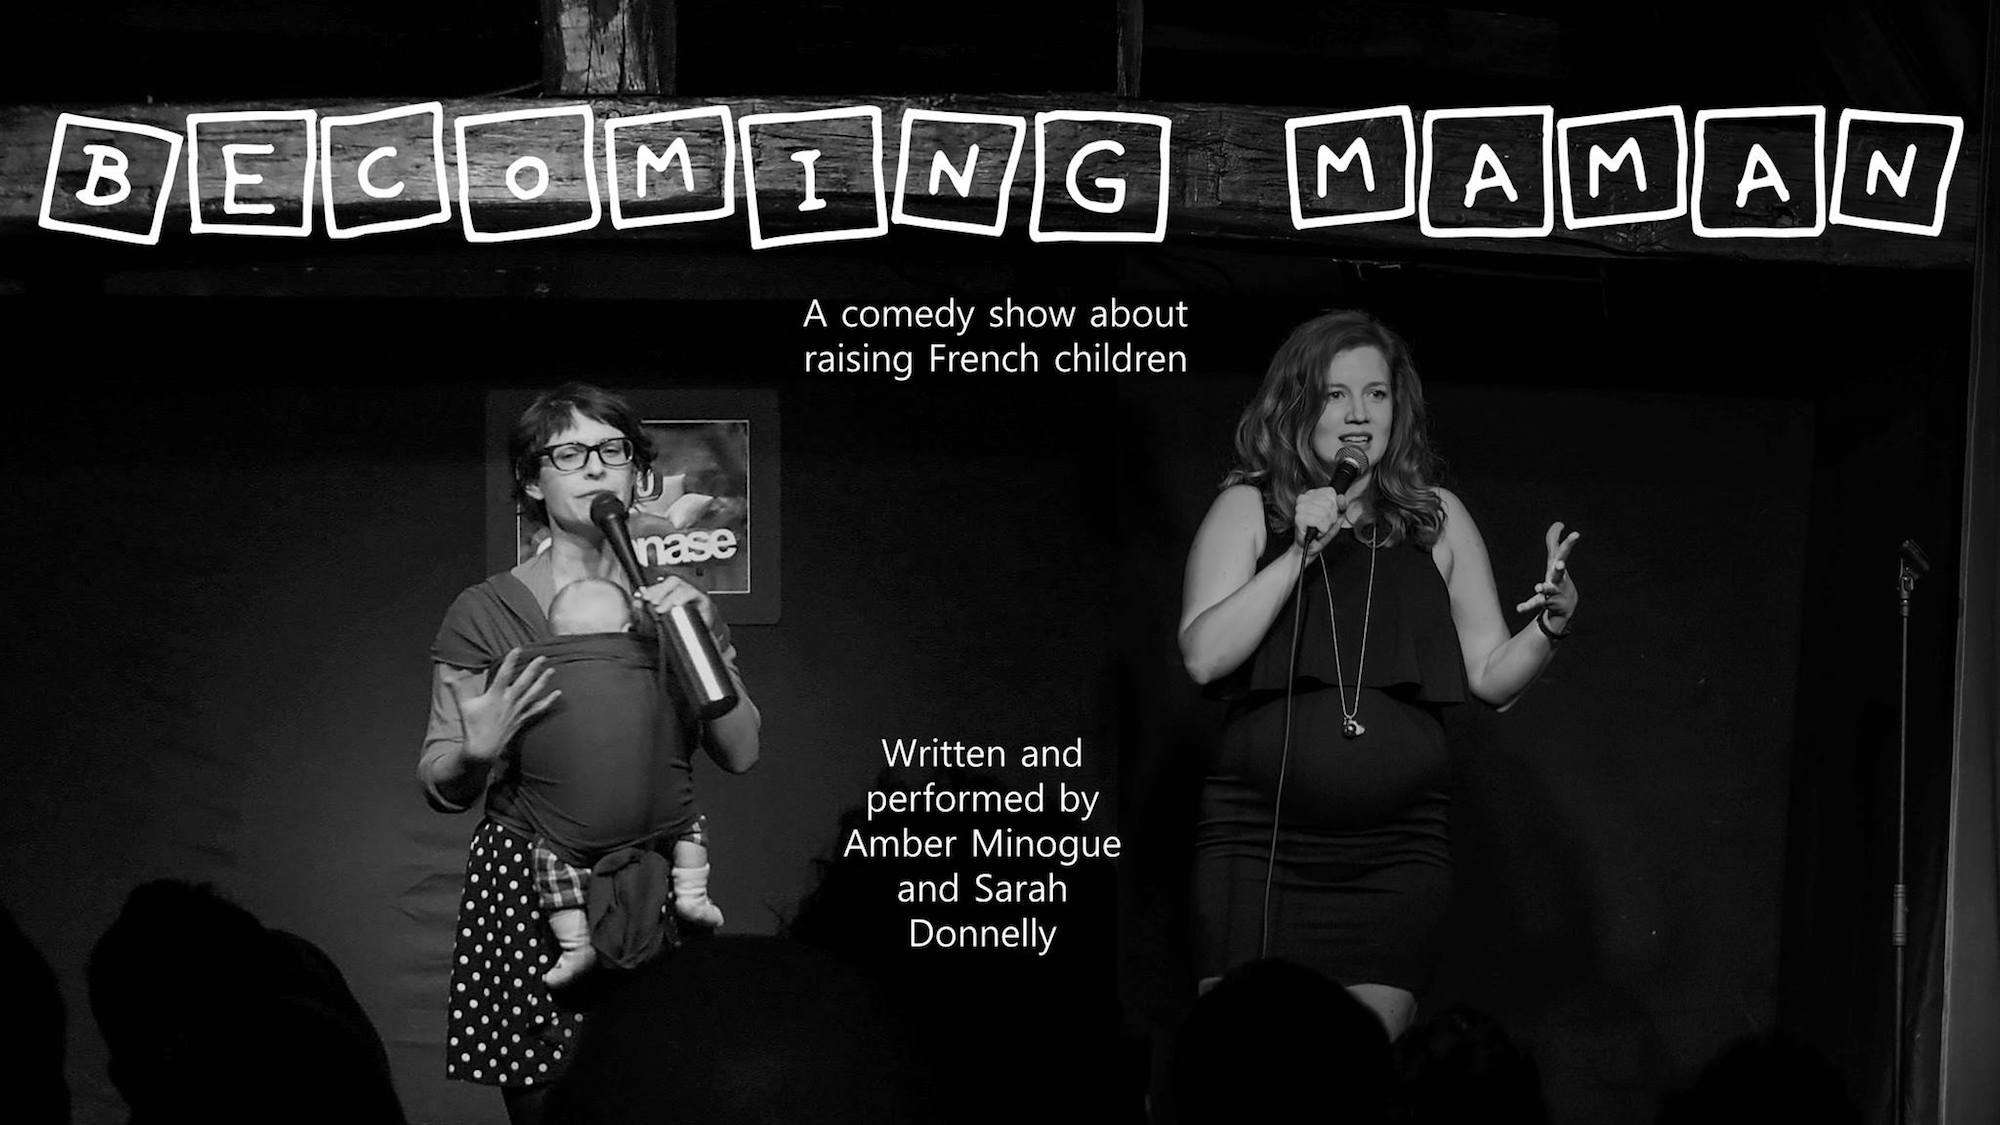 A hilarious stand-up comedy podcast Becoming Maman about raising kids in Paris is one of HiP Paris blog's favorites. 